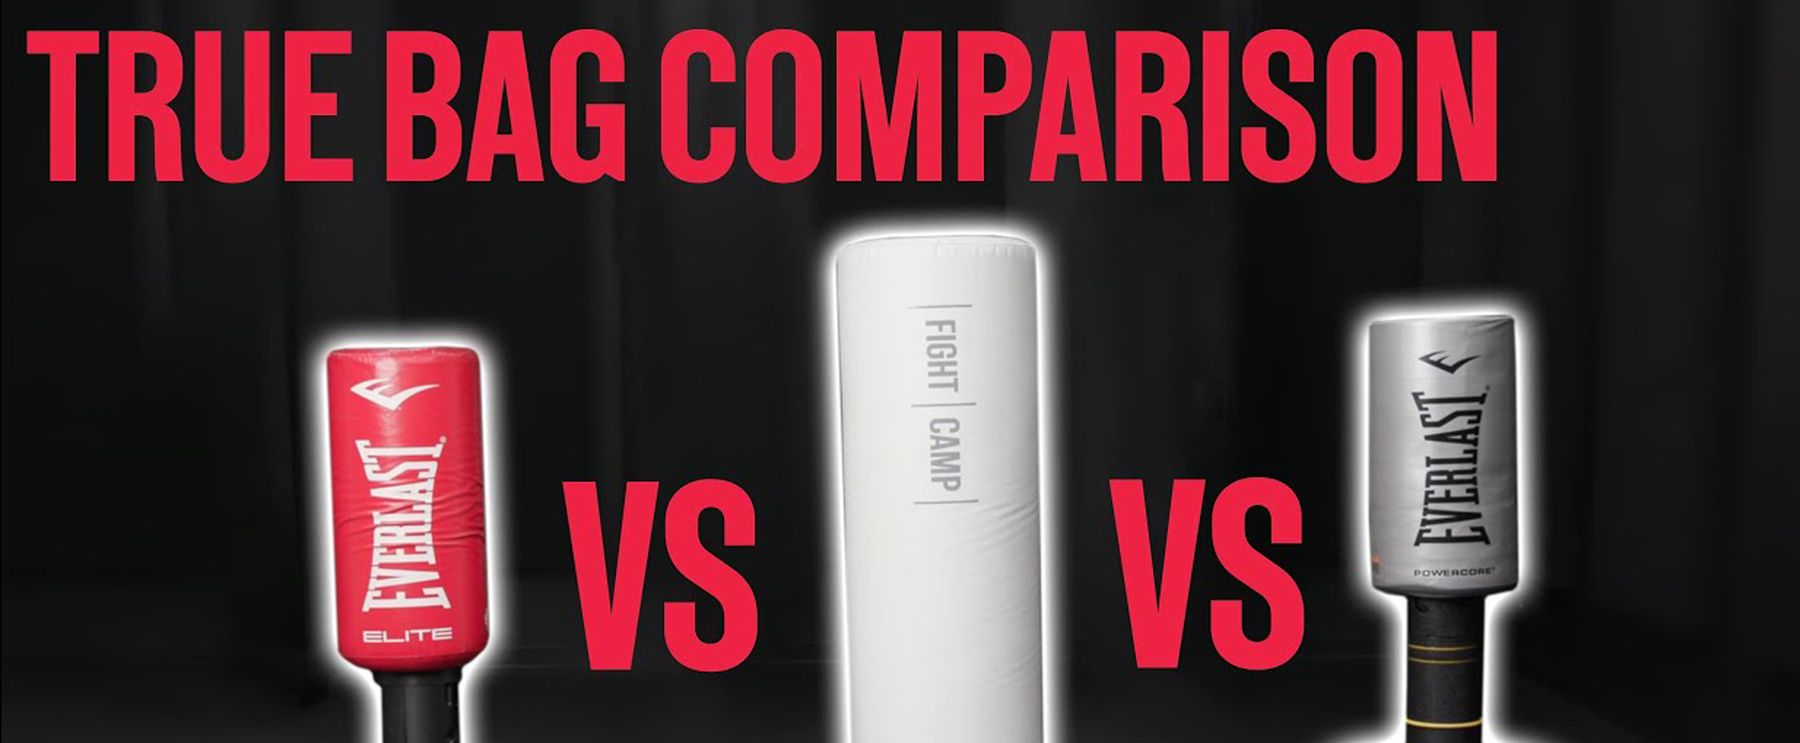 What Punching Bag Should I Buy For At-Home Use?